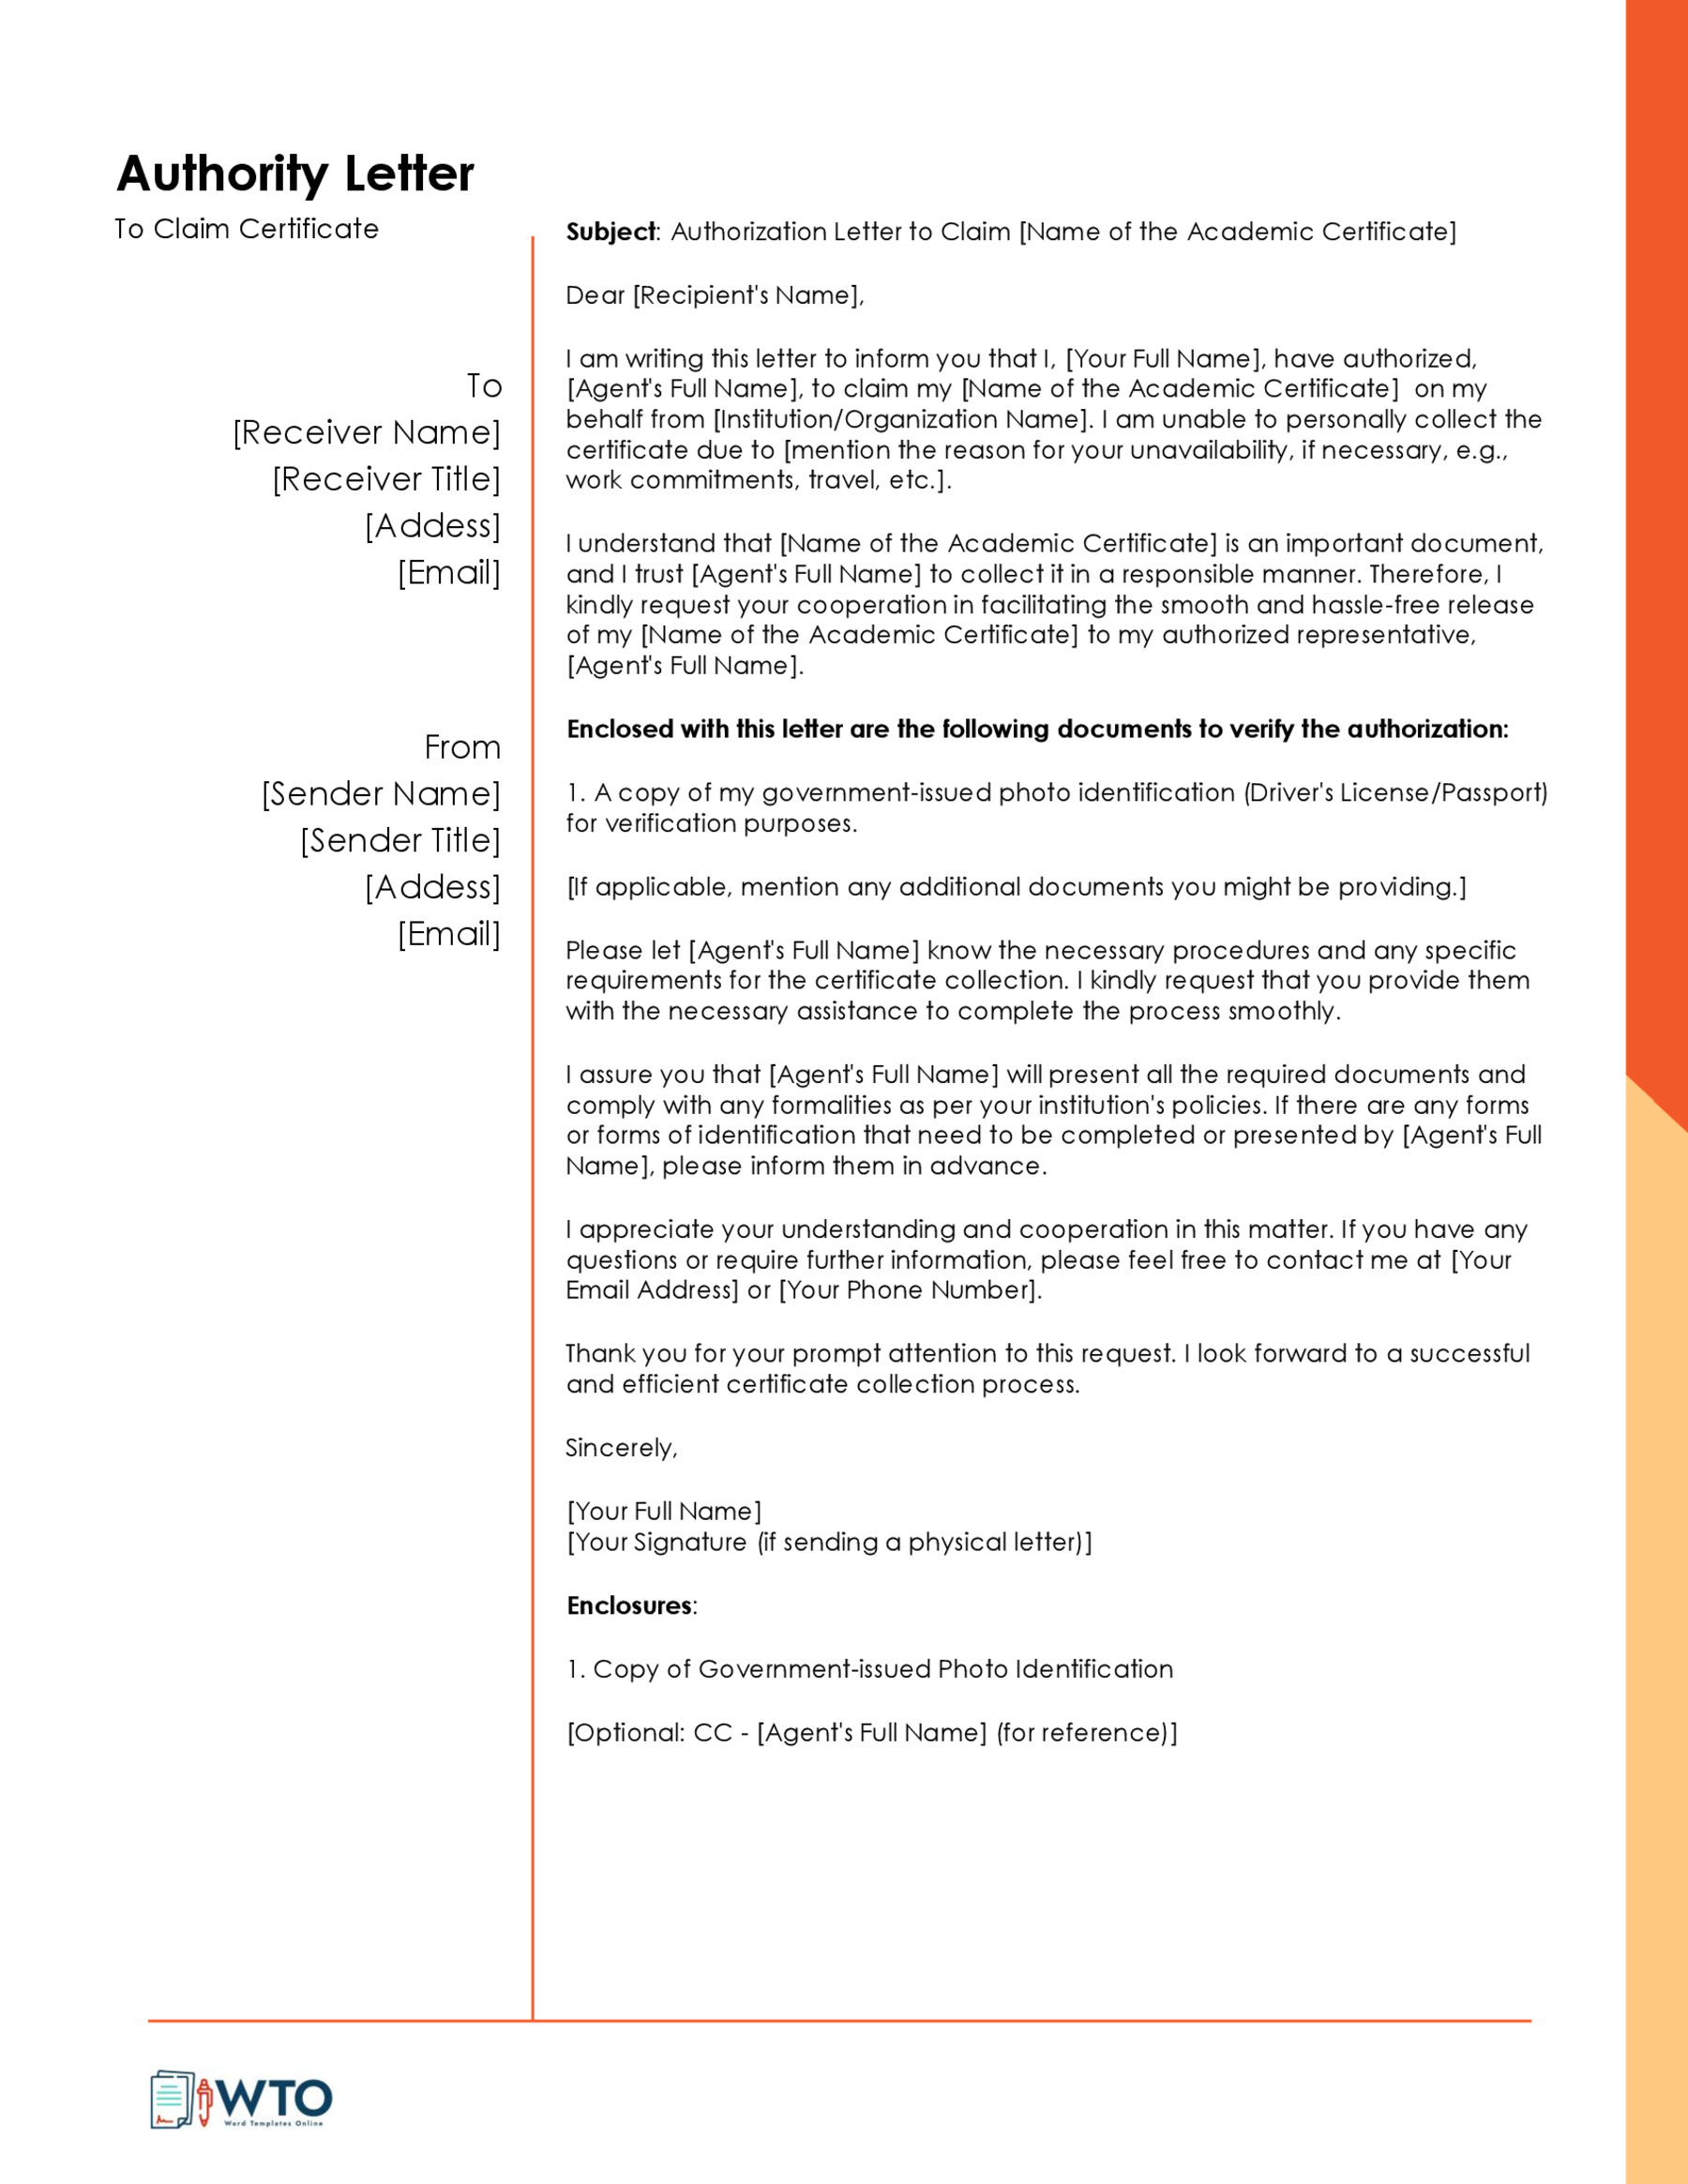 Authorization Letter to Claim Template-Free in Ms Word